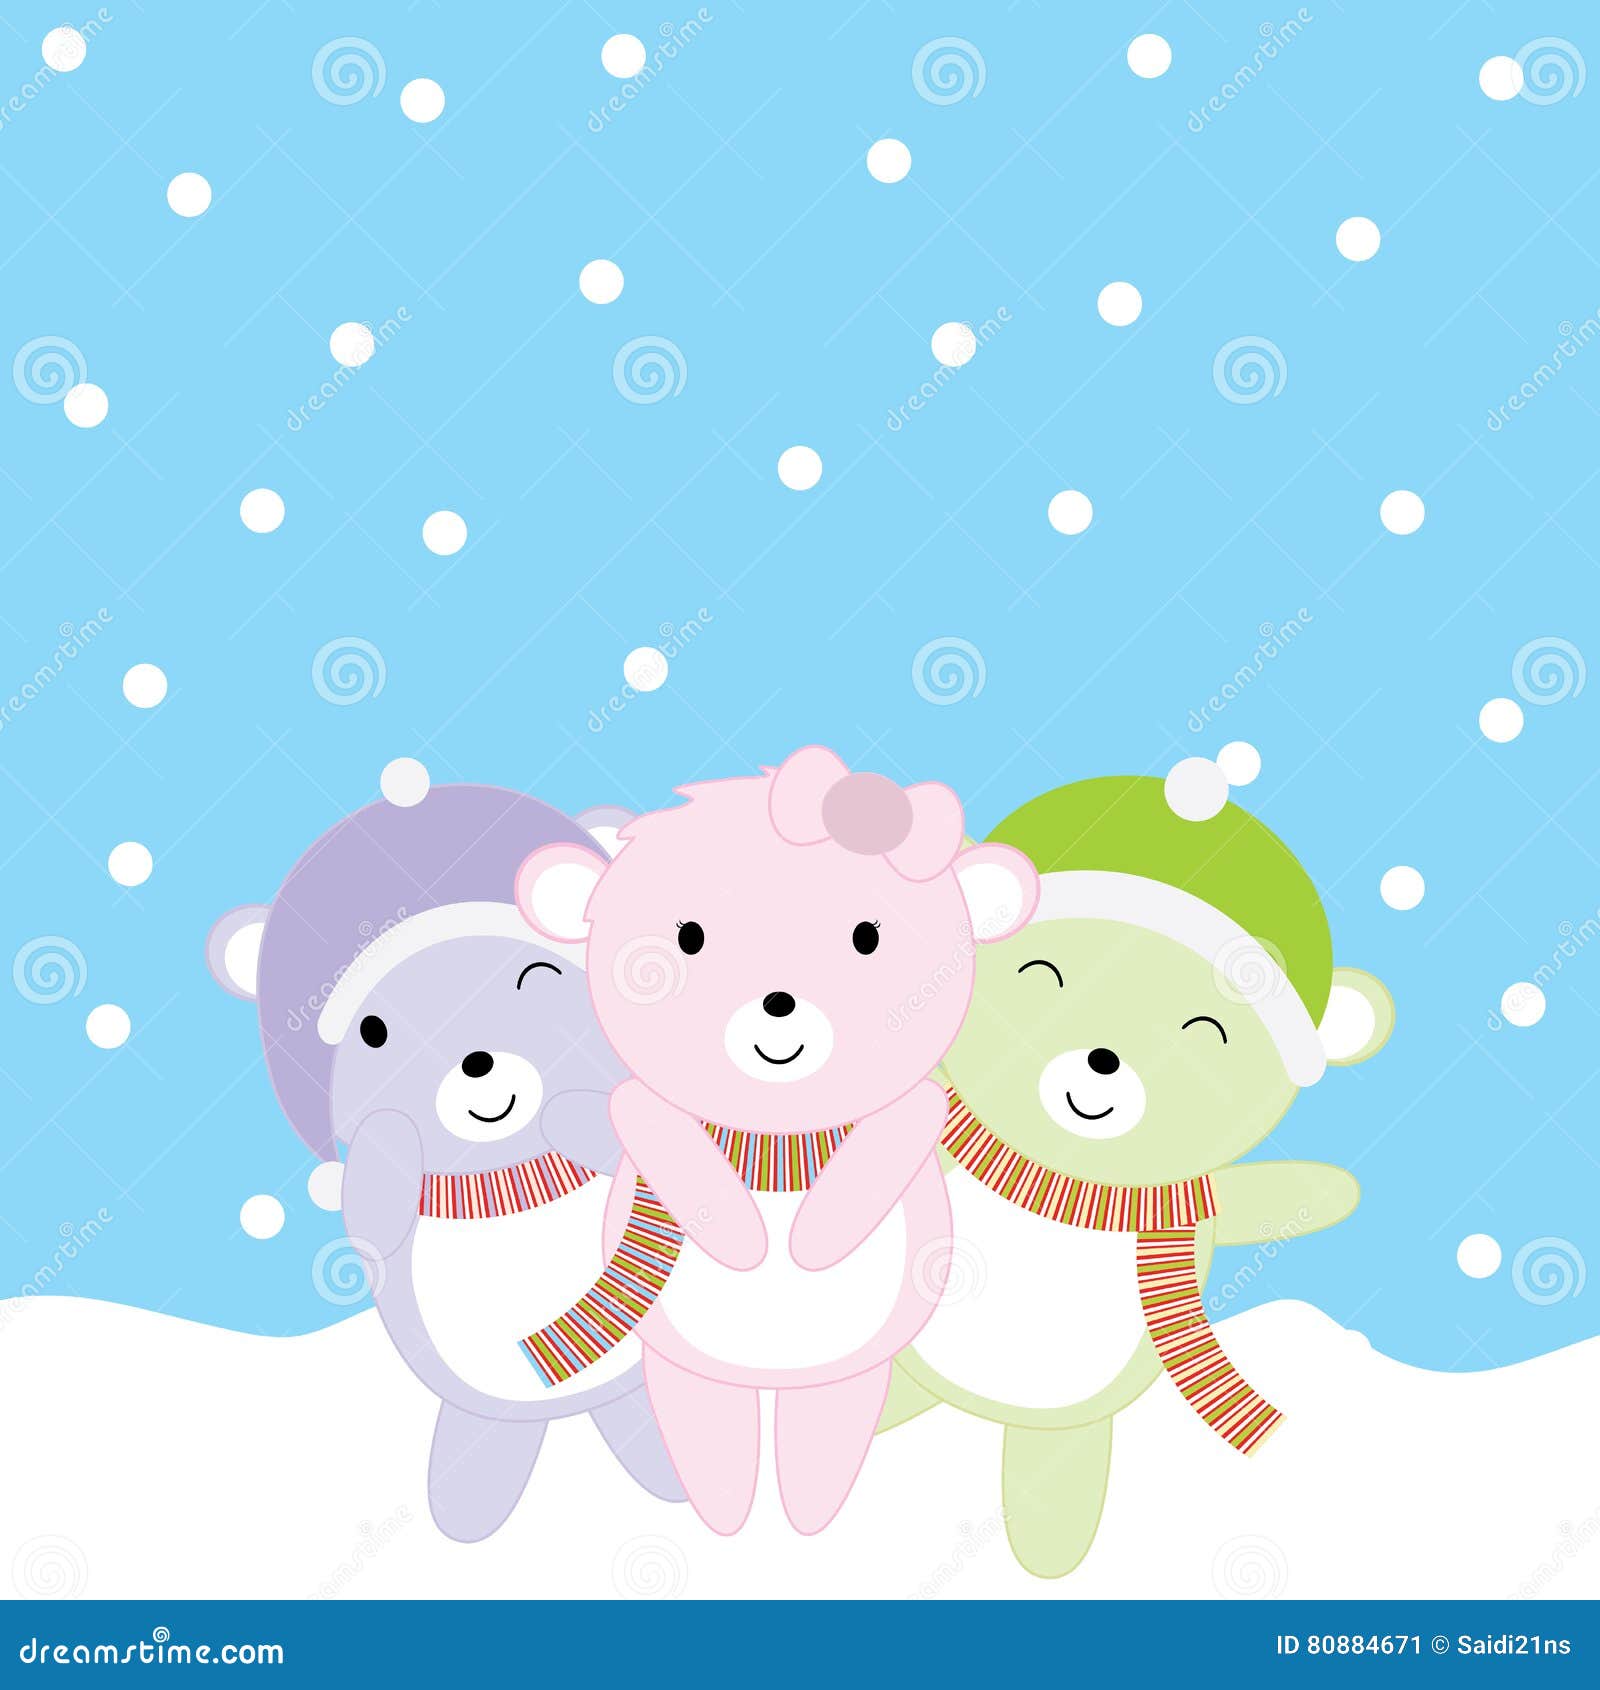 Christmas Illustration With Cute Baby Bears On Snow Fall Background